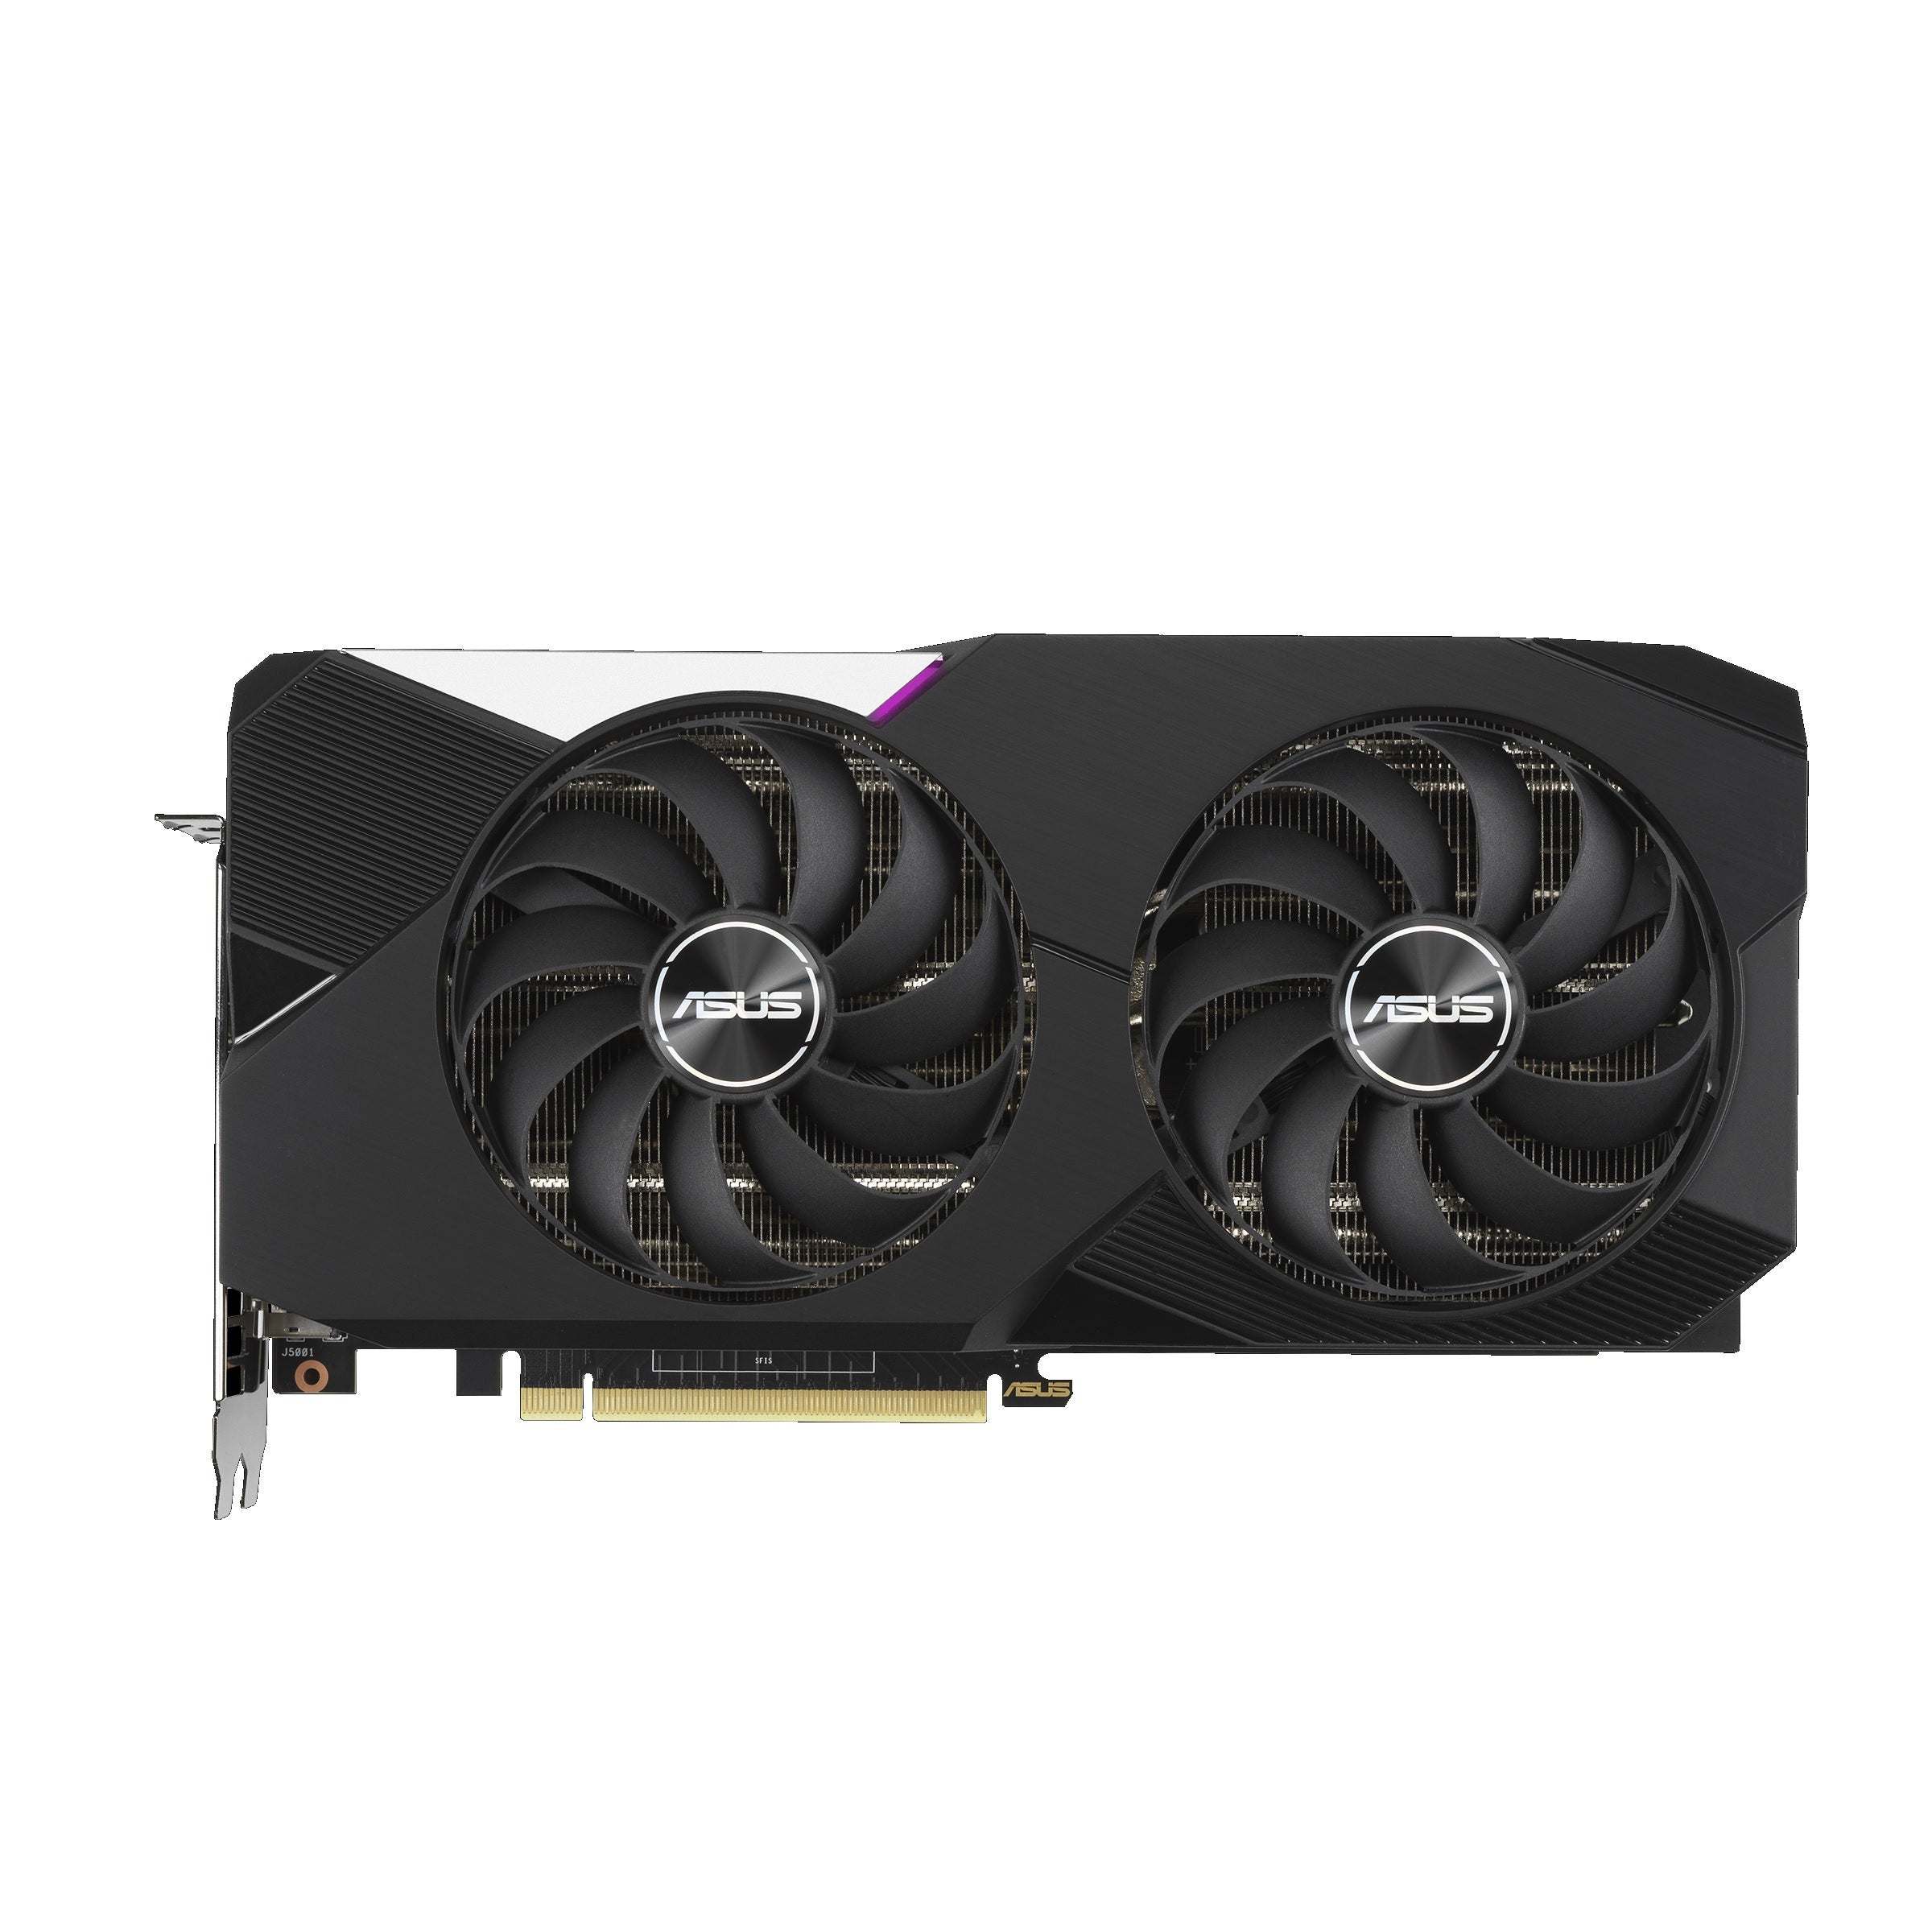 Asus Dual GeForce RTX 3070 V2 OC Edition Graphics Card